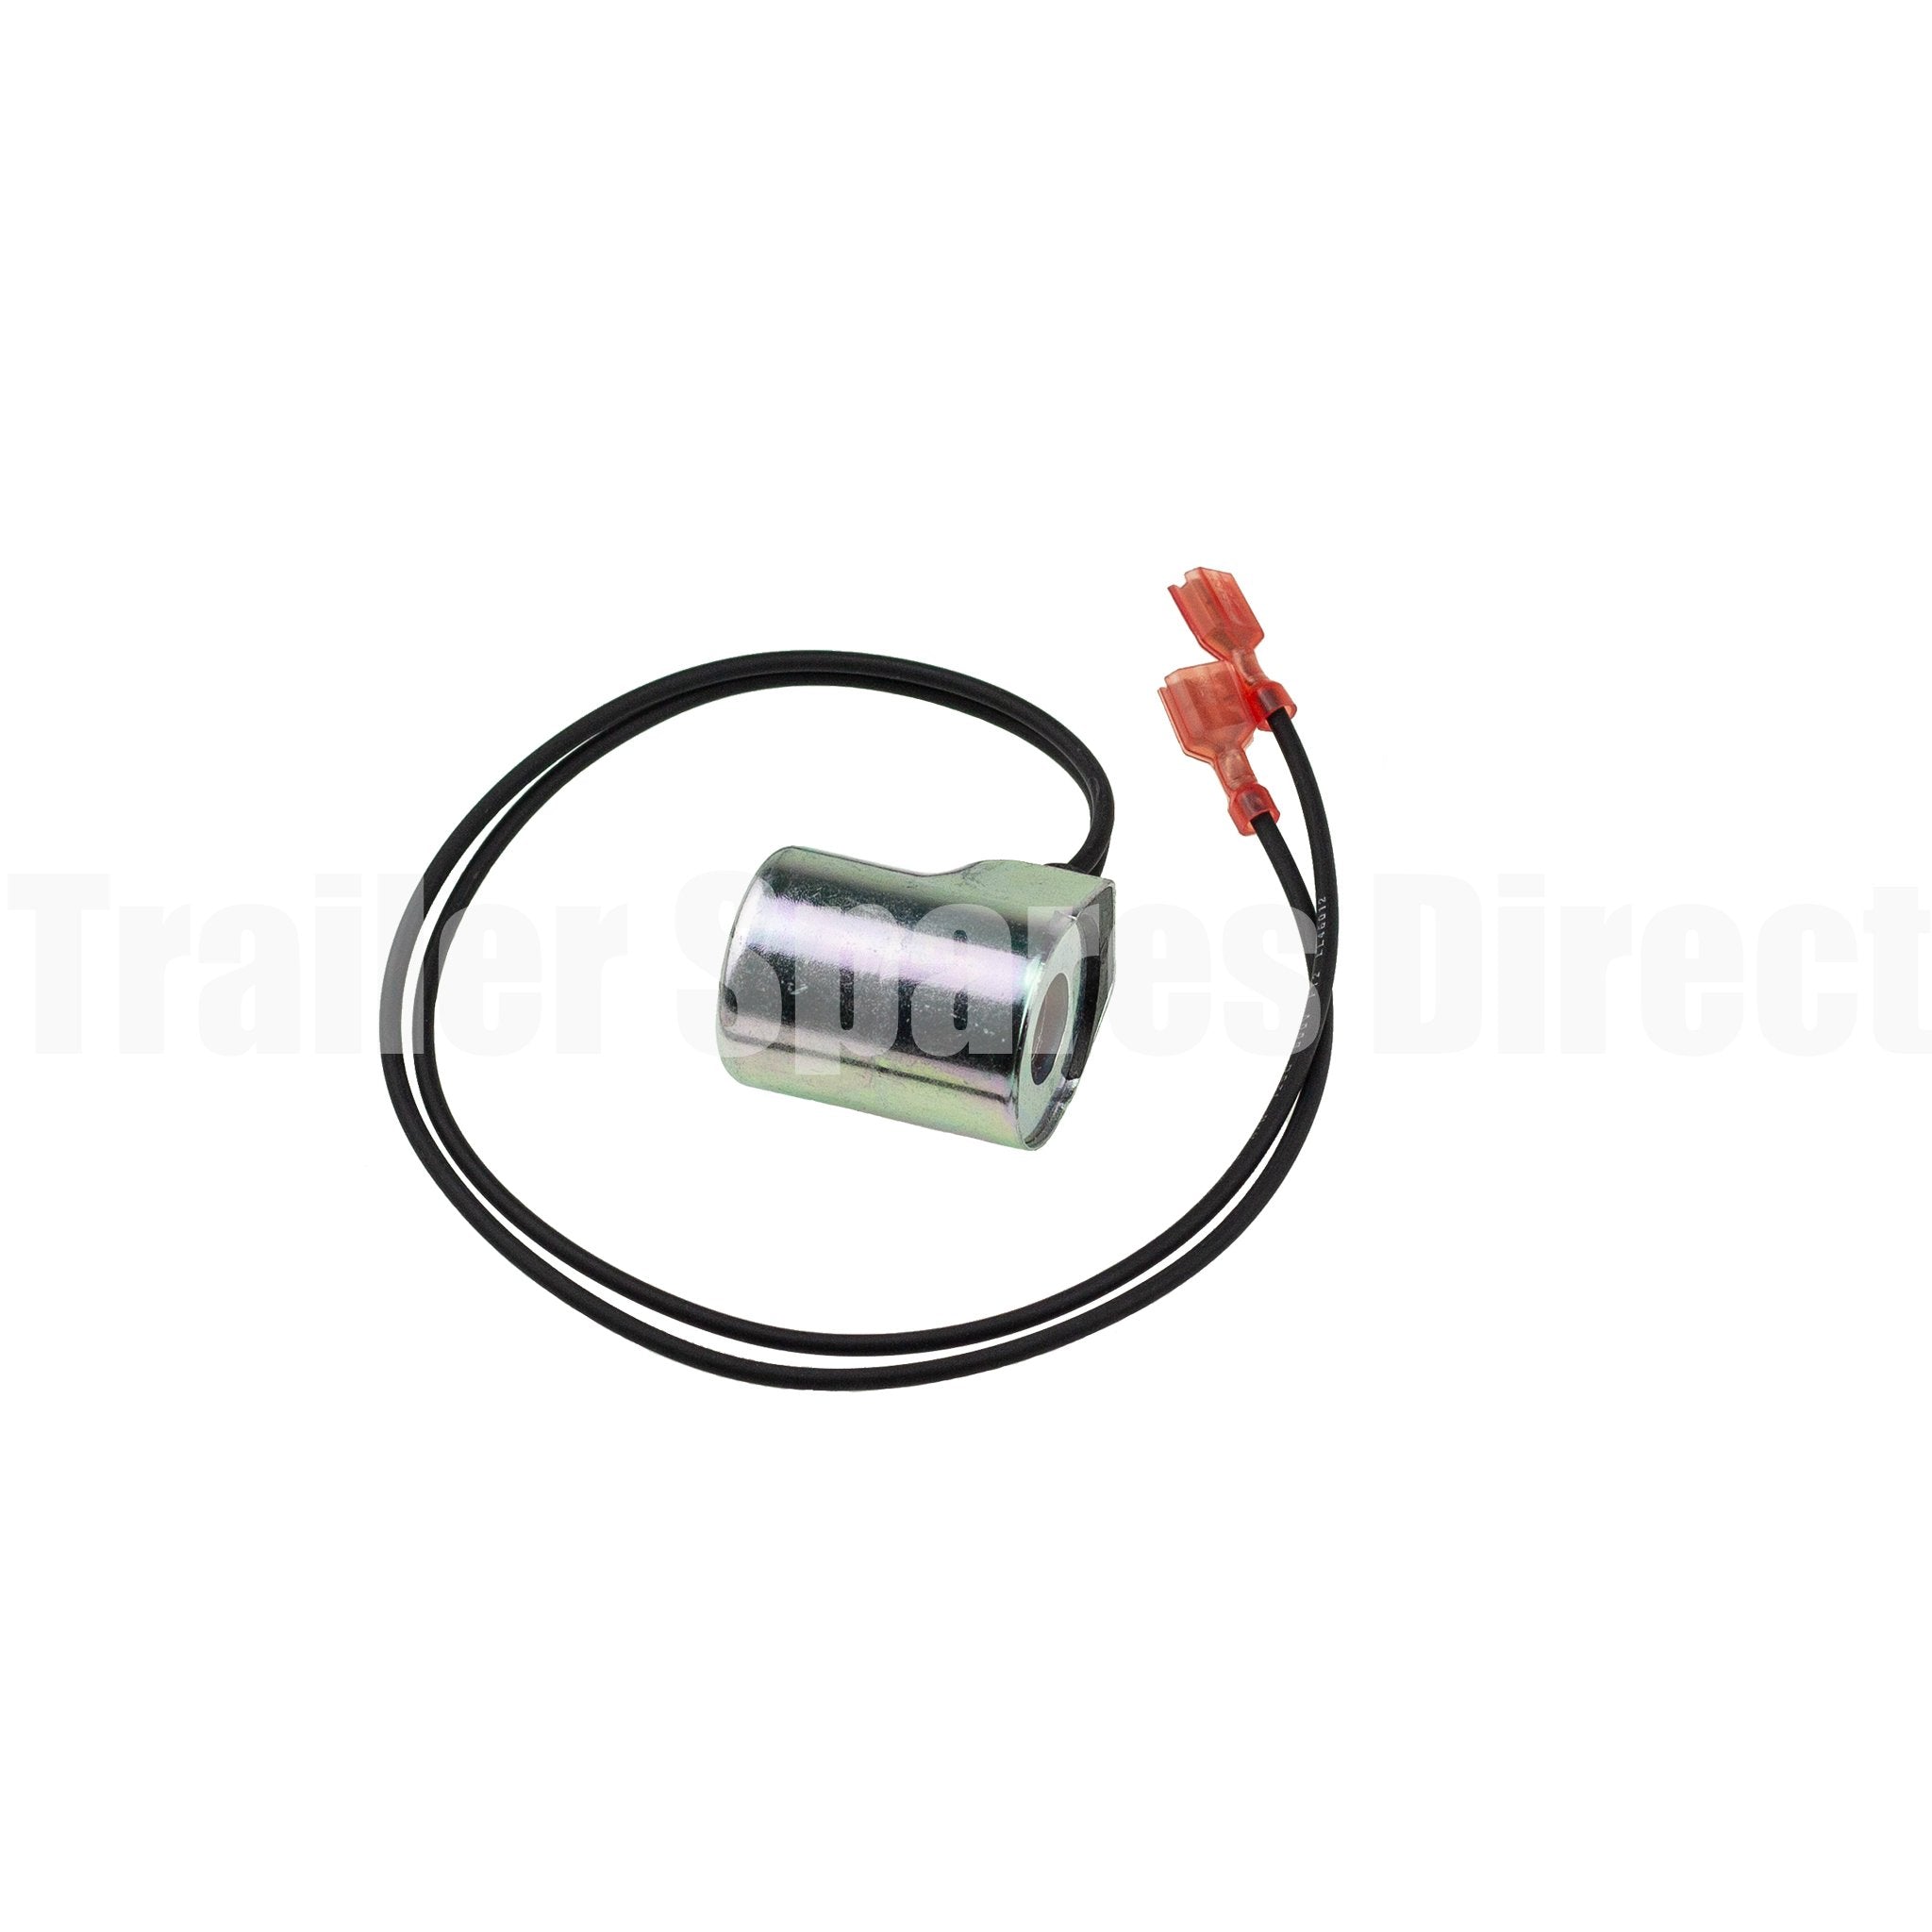 Hydrastar spares - solenoid coil assembly